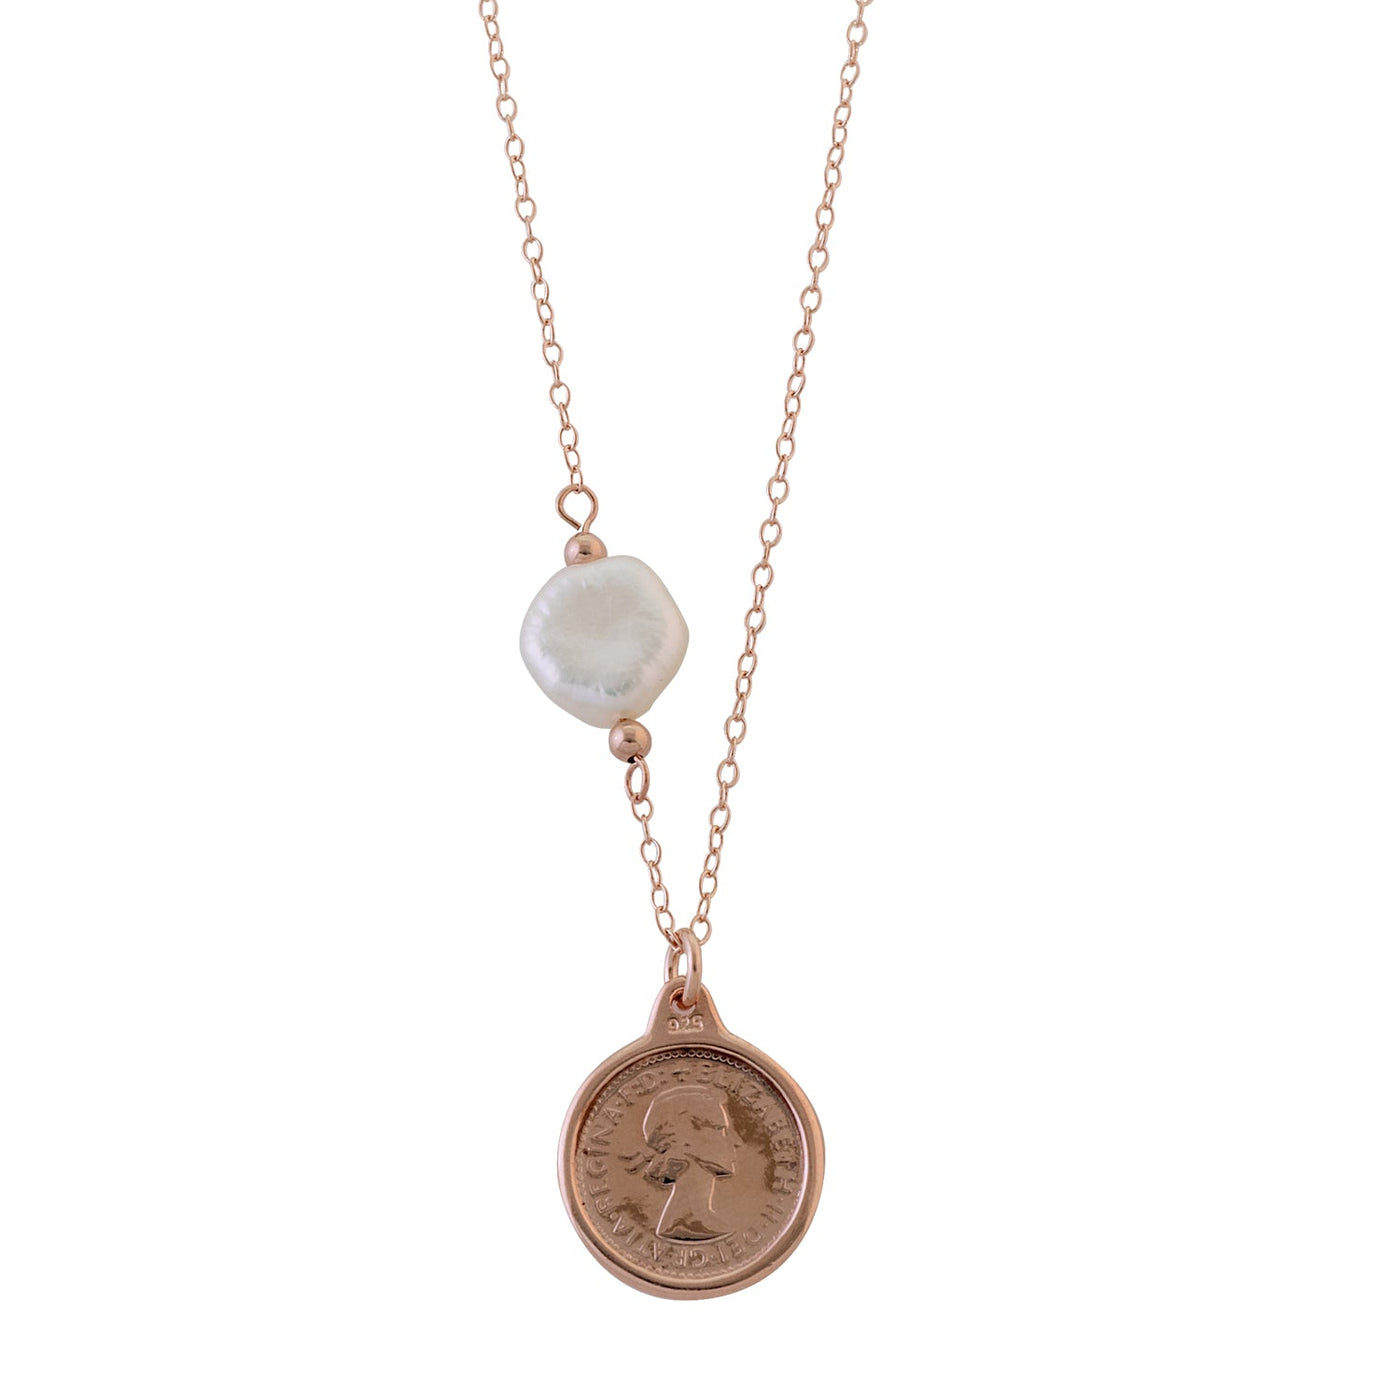 Von Treskow Threepence necklace with keshi pearl